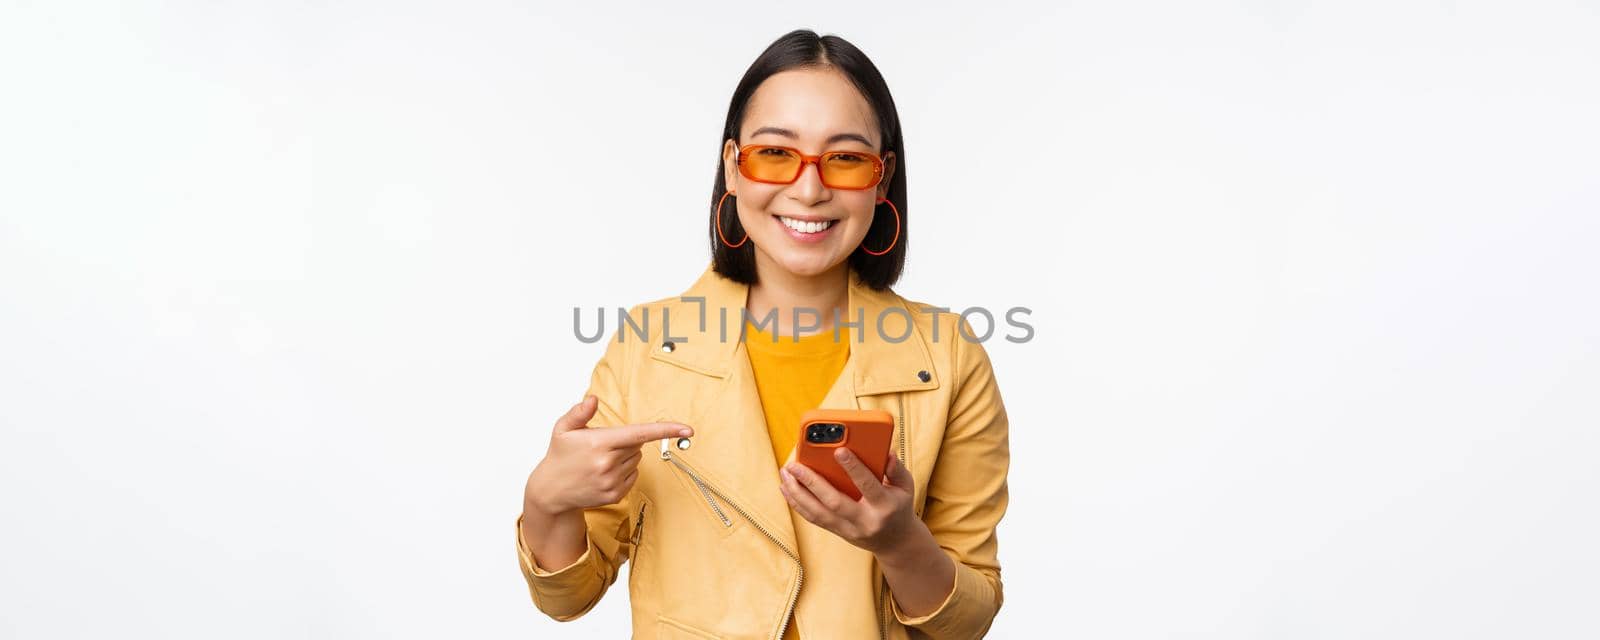 Beautiful smiling asian girl in sunglasses, pointing finger at smartphone, showing app, store on mobile phone, standing over white background.